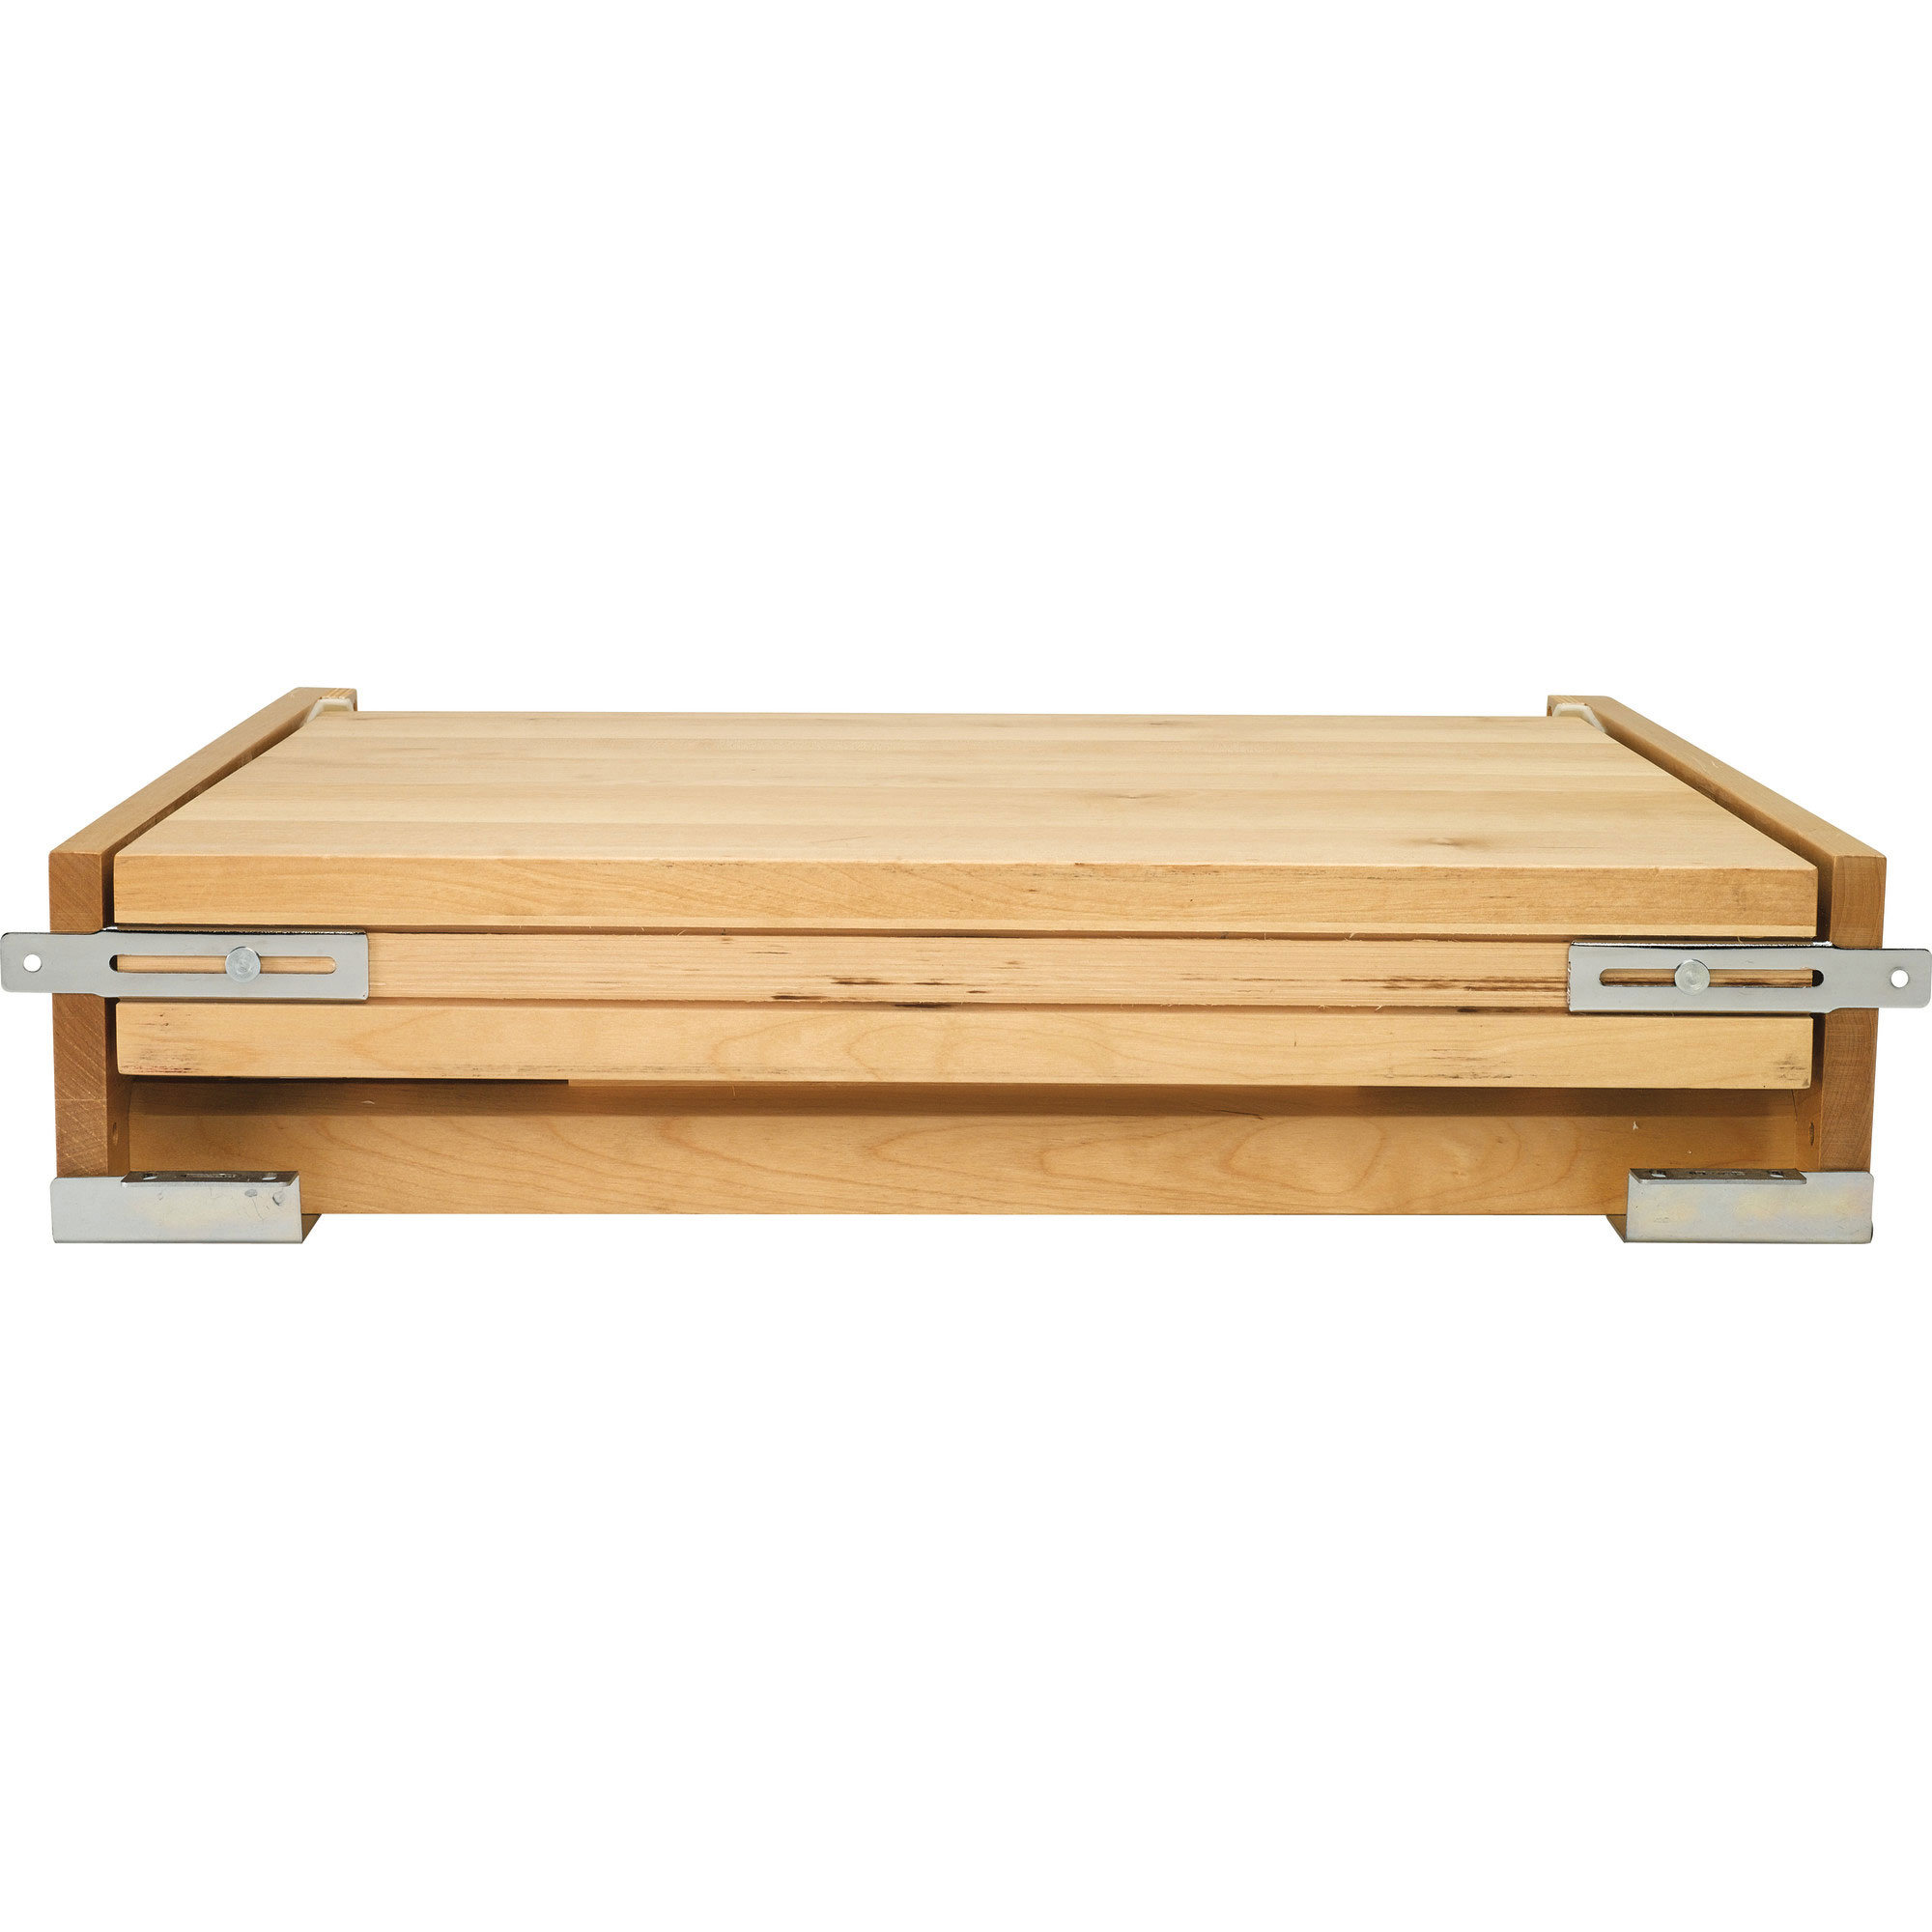 Replacement adjustable shelf - MAPLE PLYWOOD with a clear/natural finish,  custom front wood edge banding